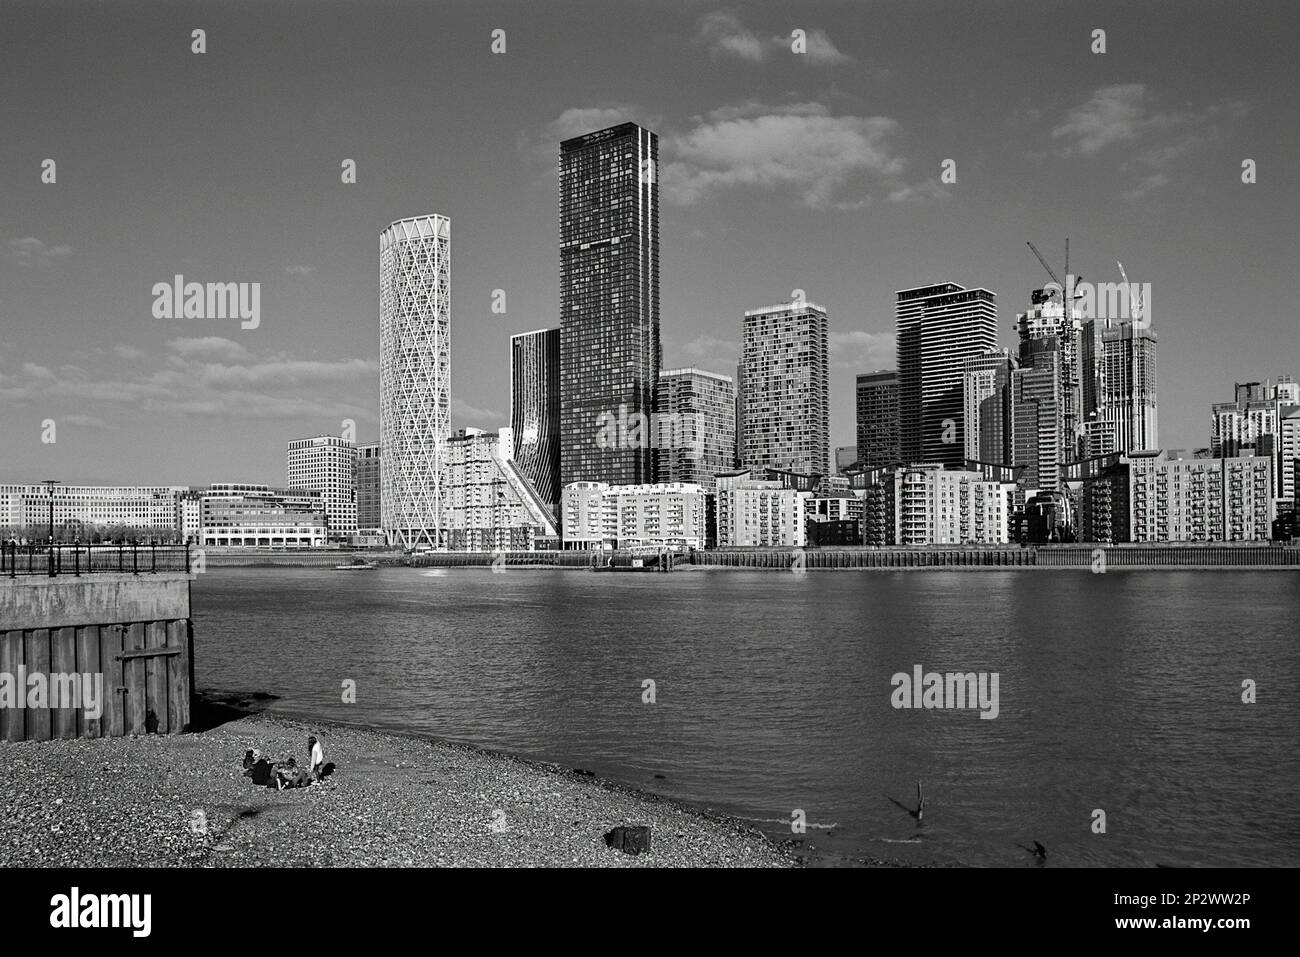 The south bank of the River Thames opposite Canary Wharf, London UK, with people on the beach, in monochrome Stock Photo